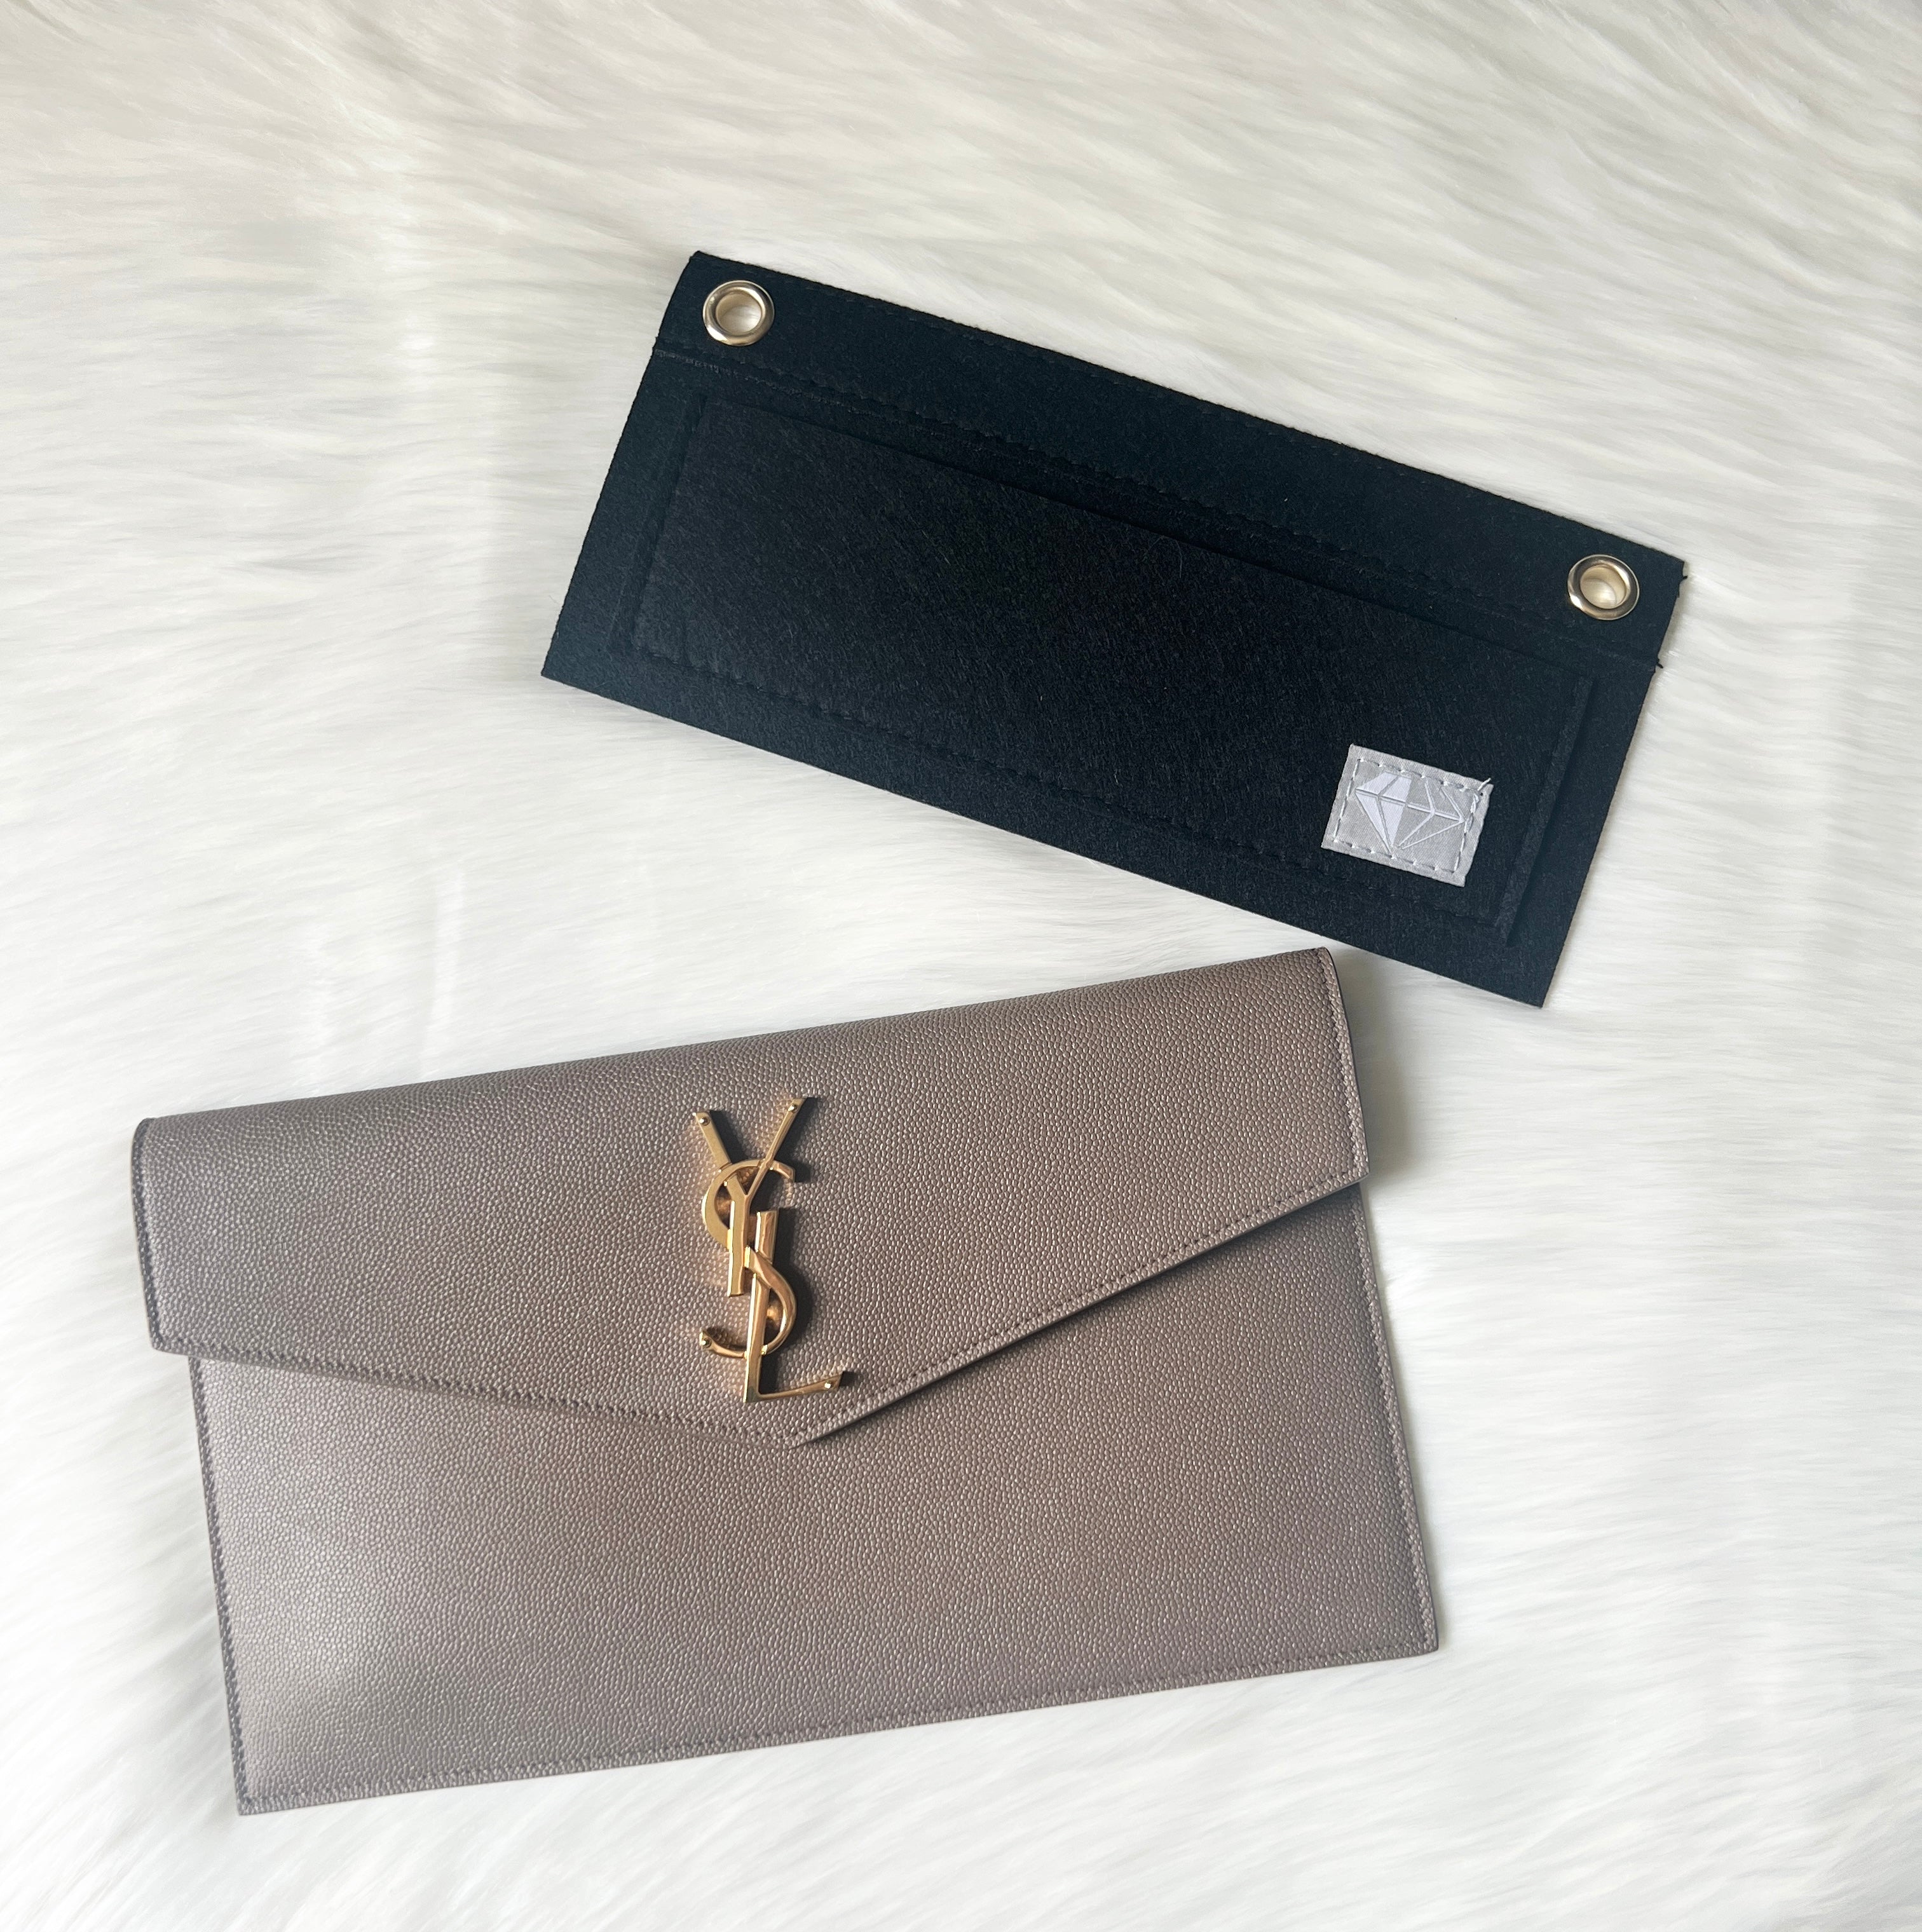 YSL Uptown Clutch Conversion Kit – FromHER